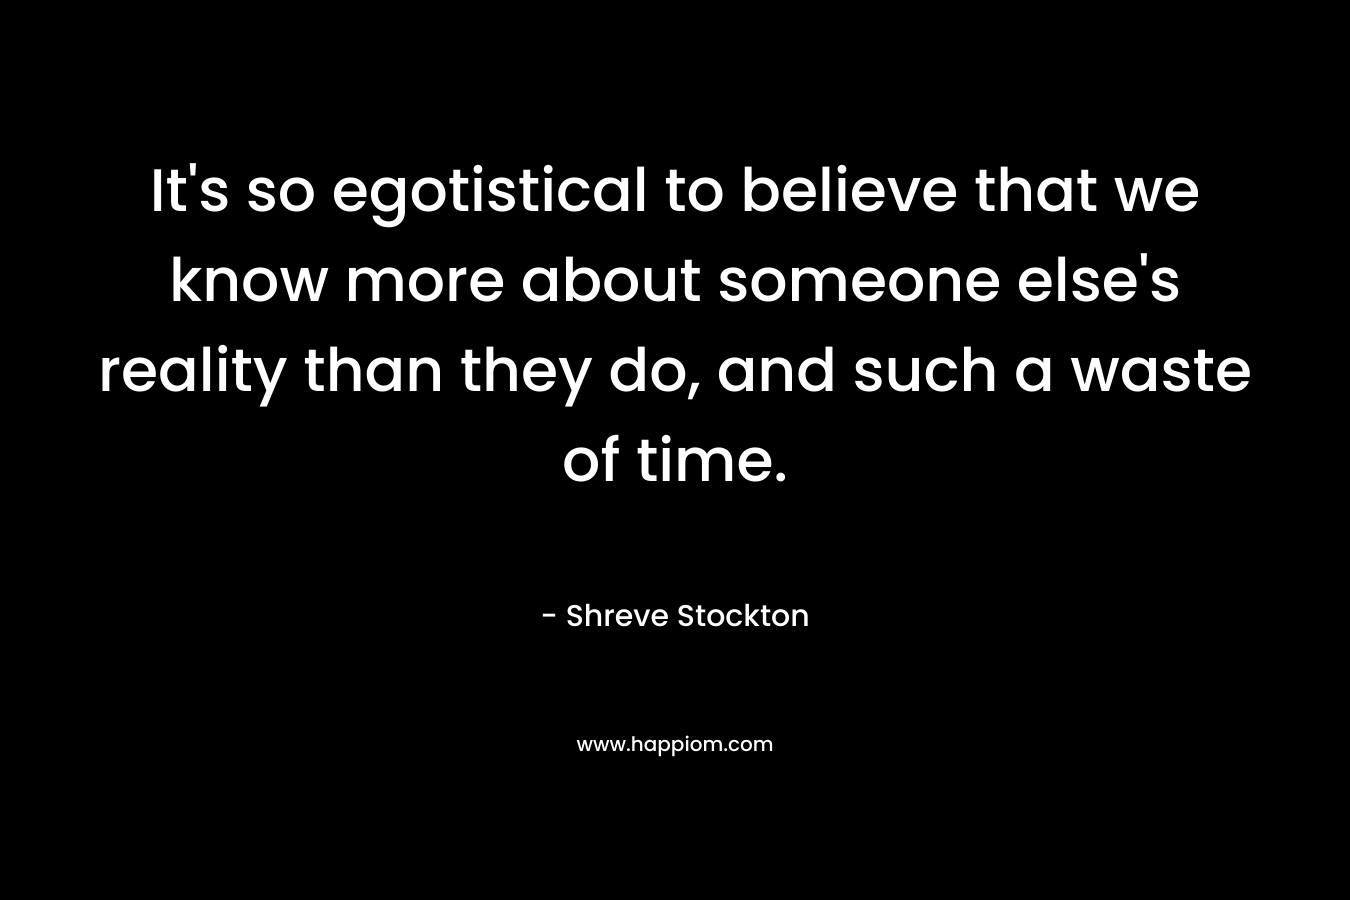 It's so egotistical to believe that we know more about someone else's reality than they do, and such a waste of time.